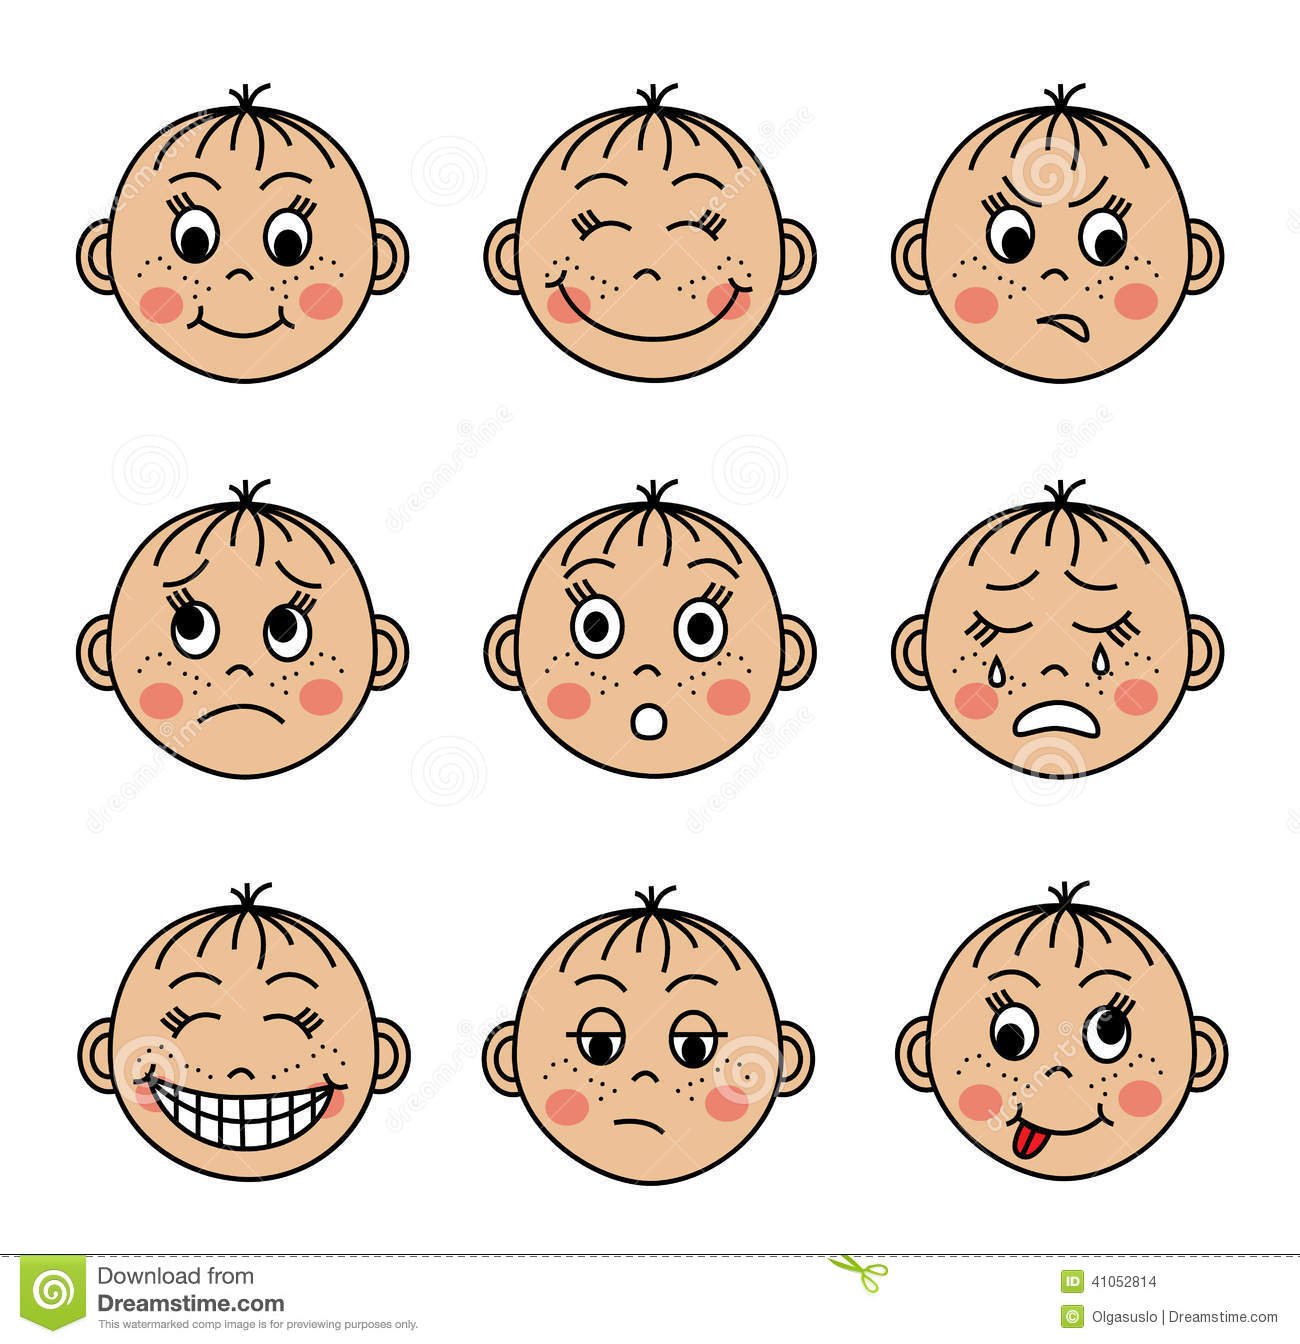 Emotions faces clipart 5 » Clipart Station.